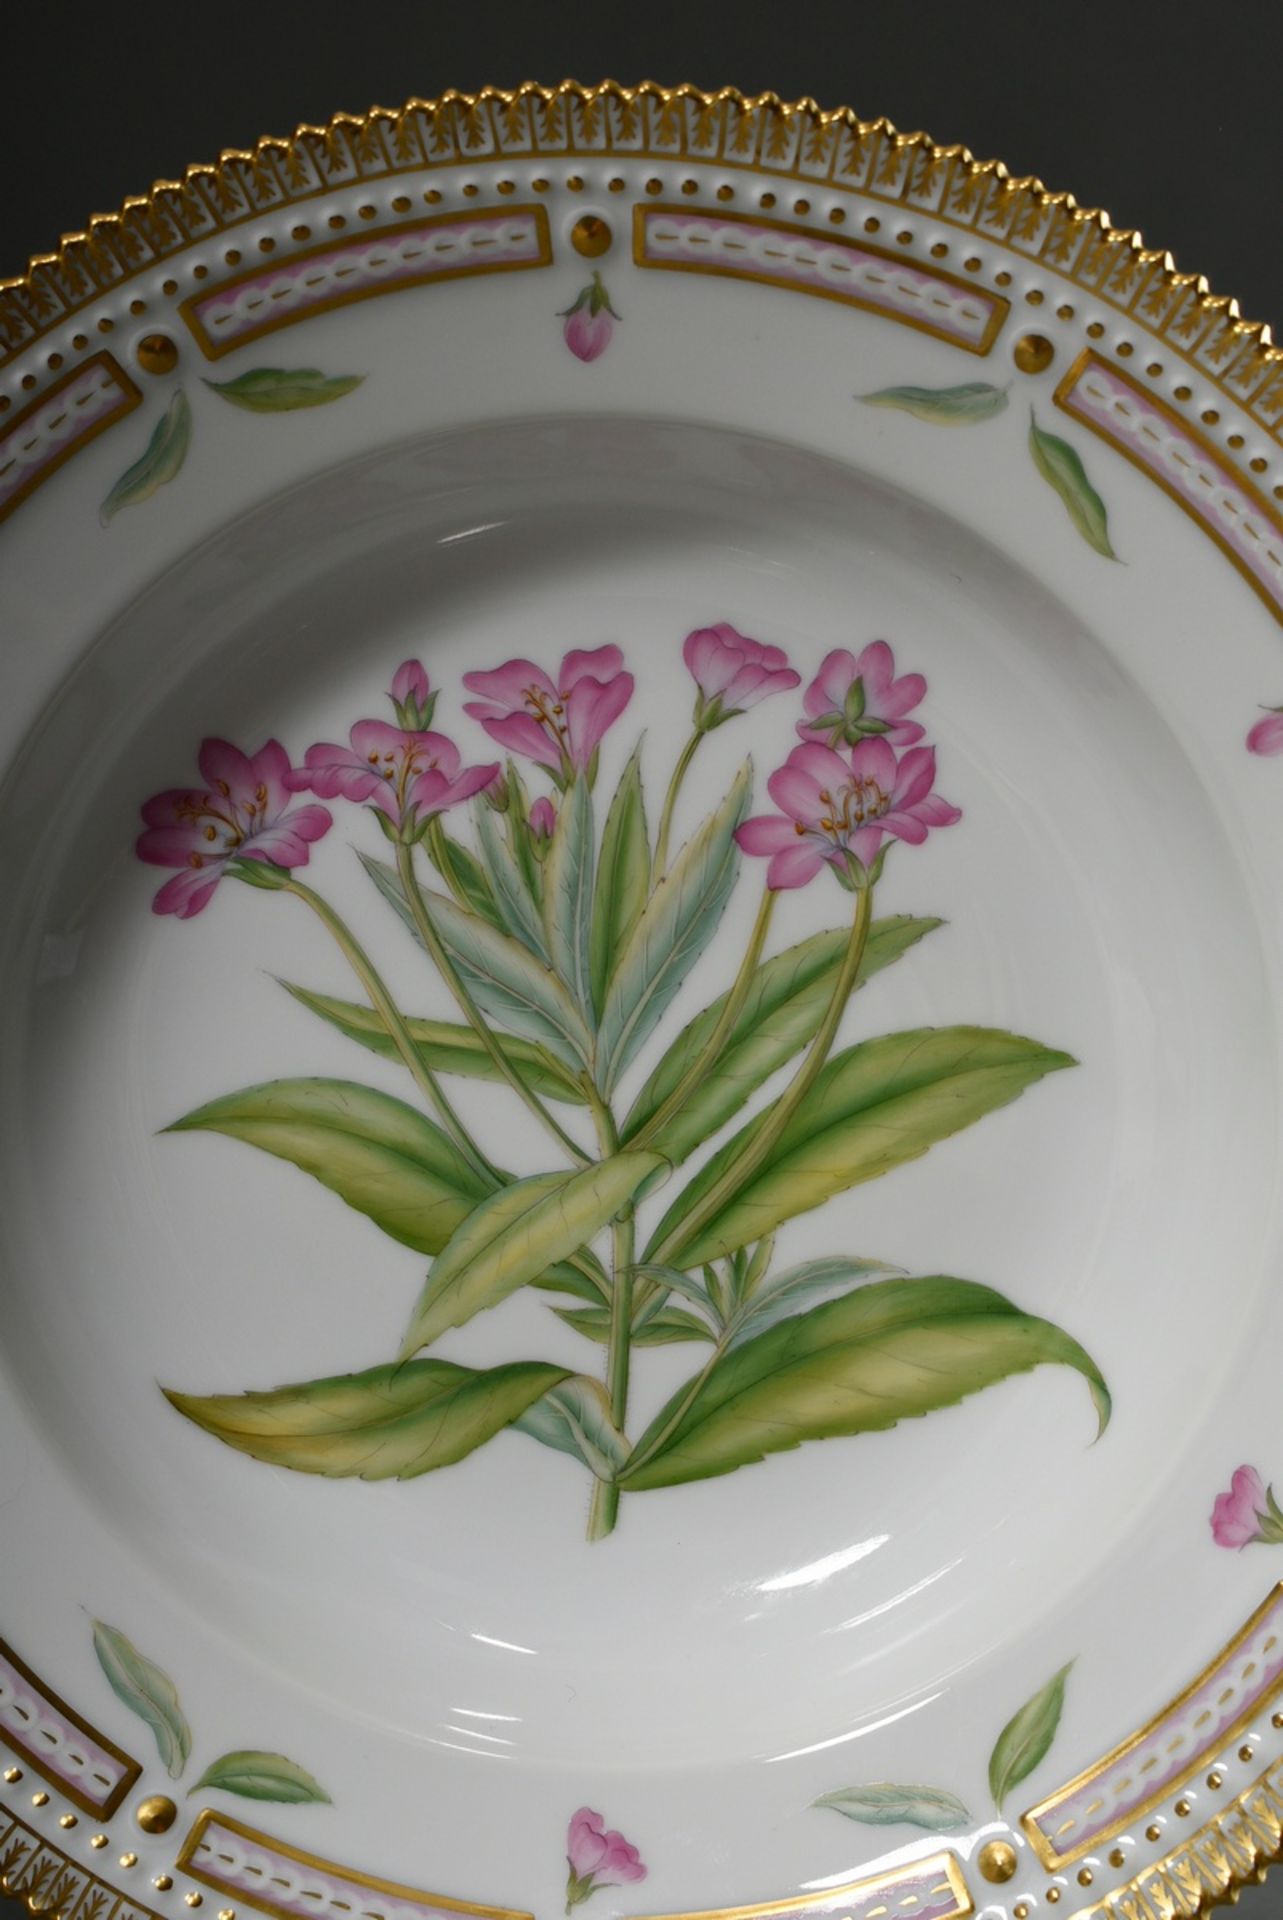 7 Royal Copenhagen "Flora Danica" plate with polychrome painting in the mirror and gold decorated s - Image 9 of 17